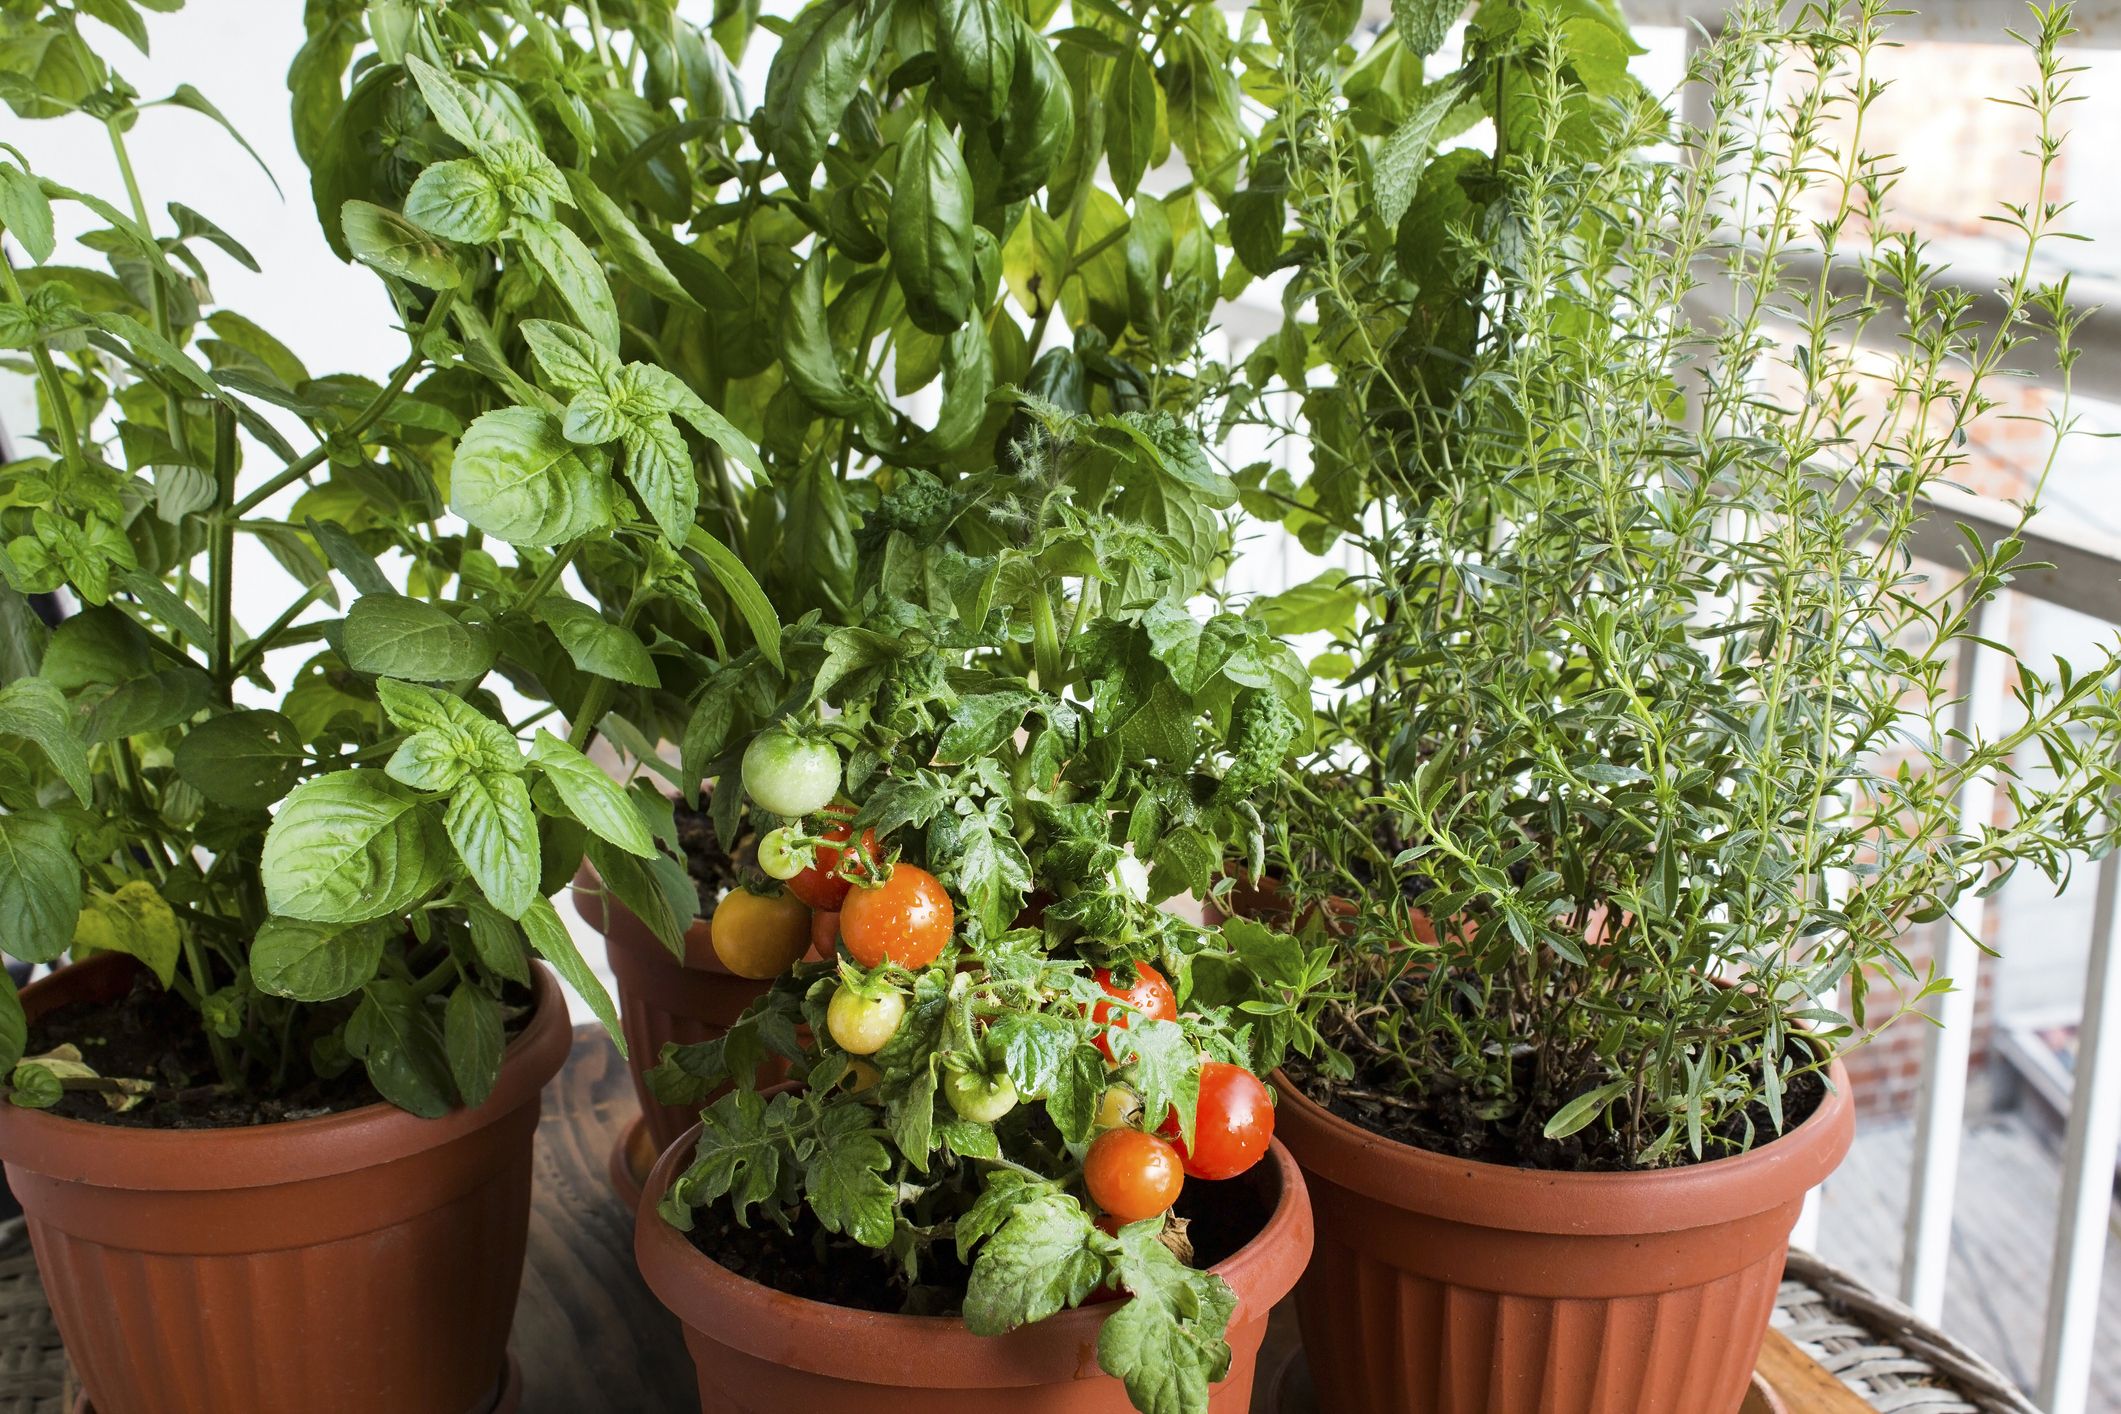 How To Grow Veggies In Pots And Planters At Home